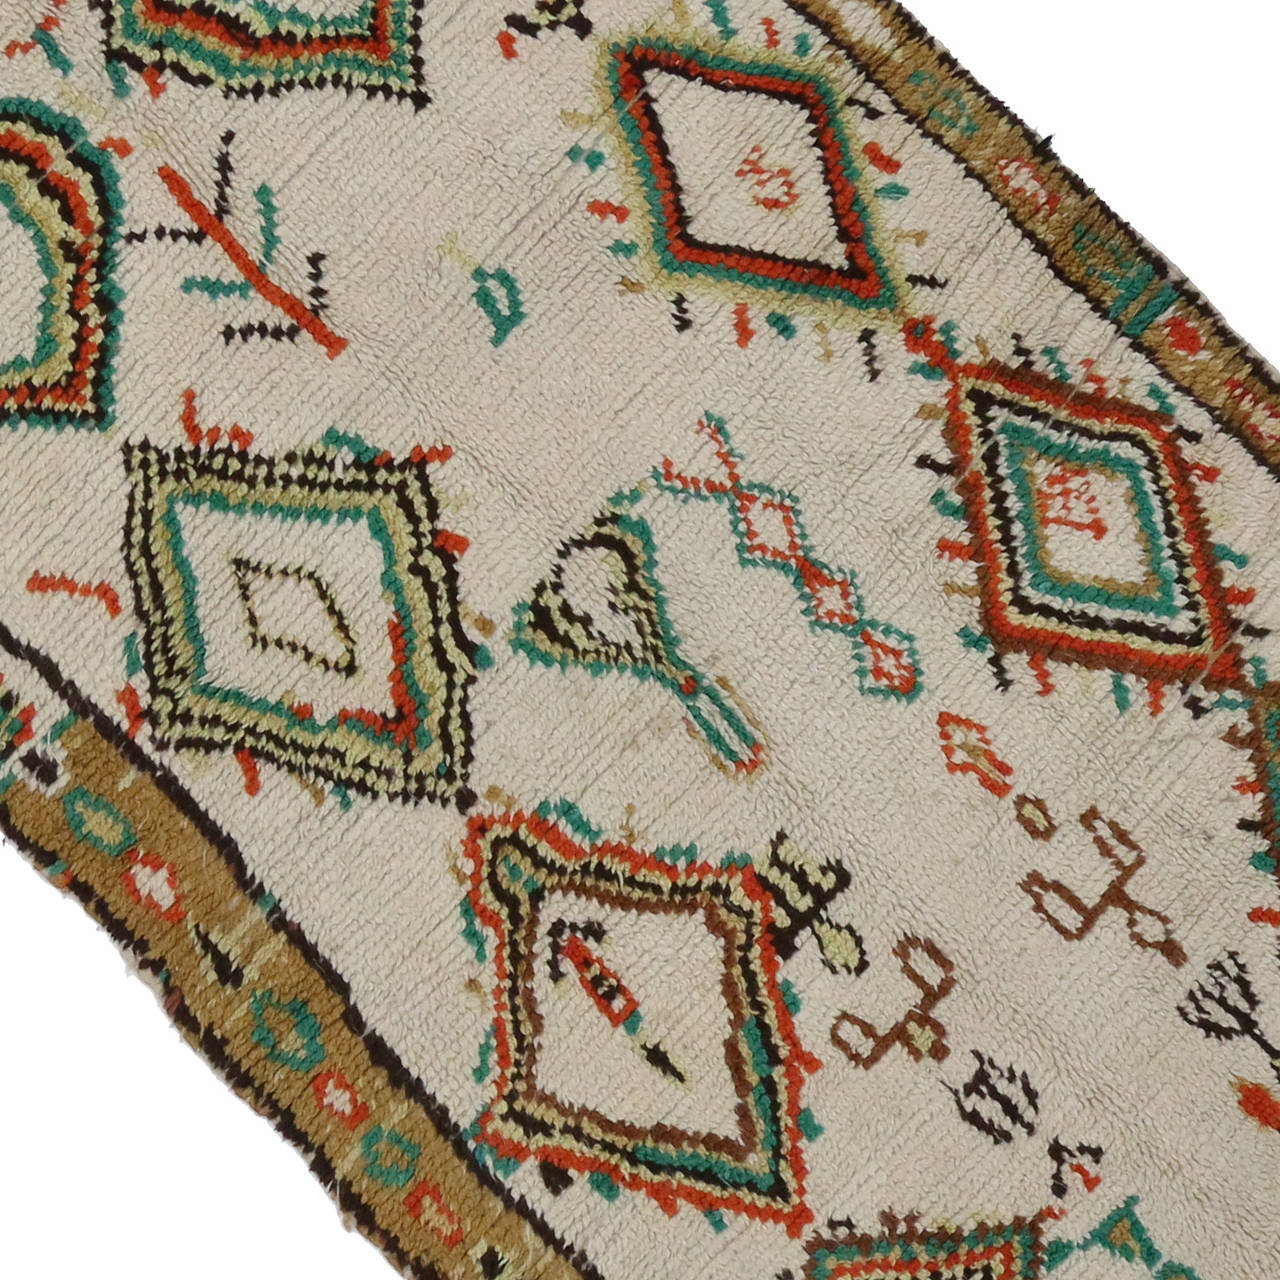 Wool Vintage Moroccan Azilal Runner with Modern Tribal Style, Shag Hallway Runner